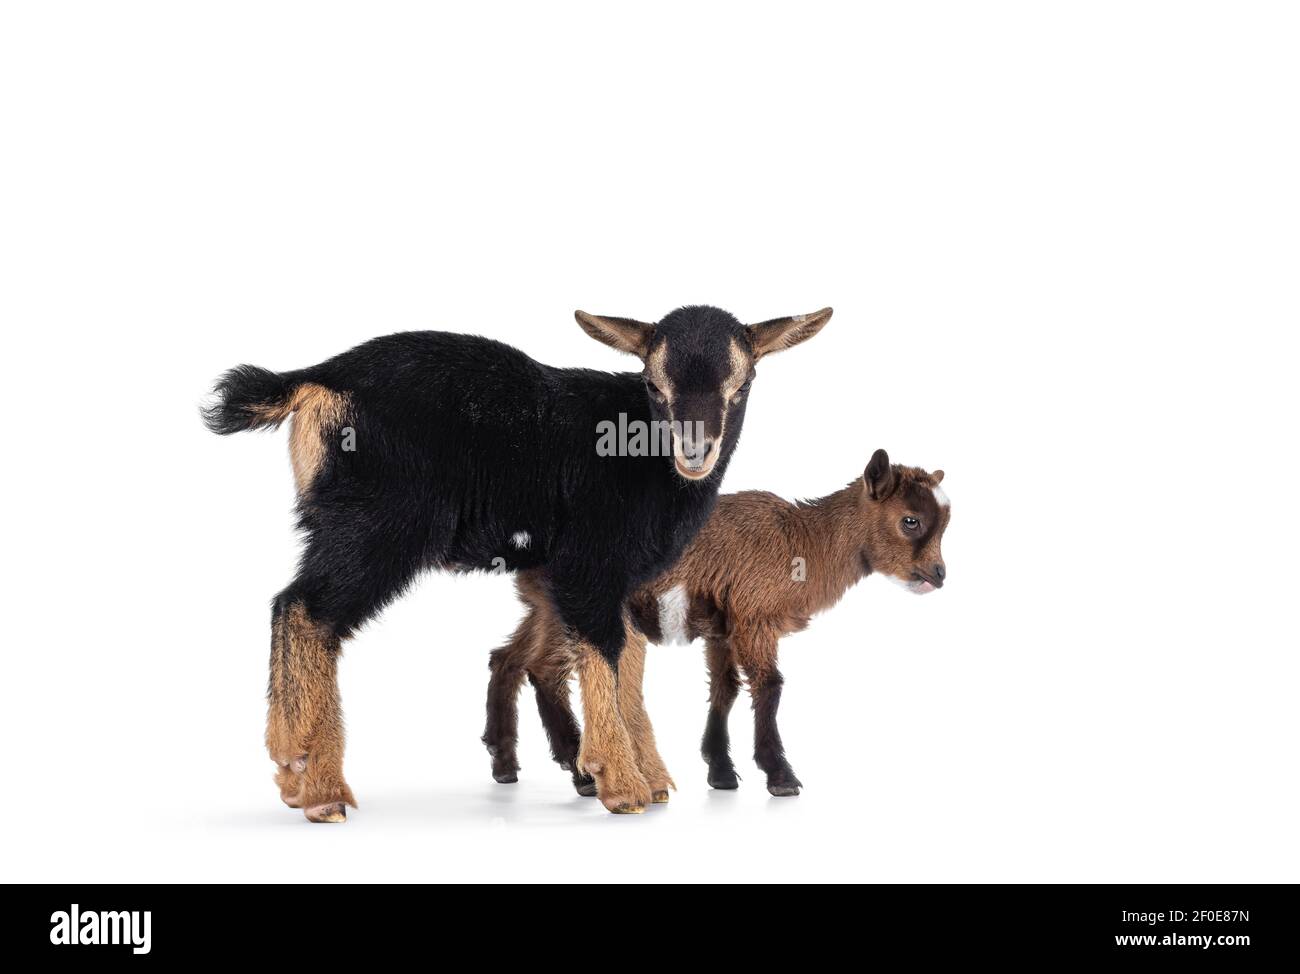 Two cute little goats standing together. Isolated on white background. Stock Photo